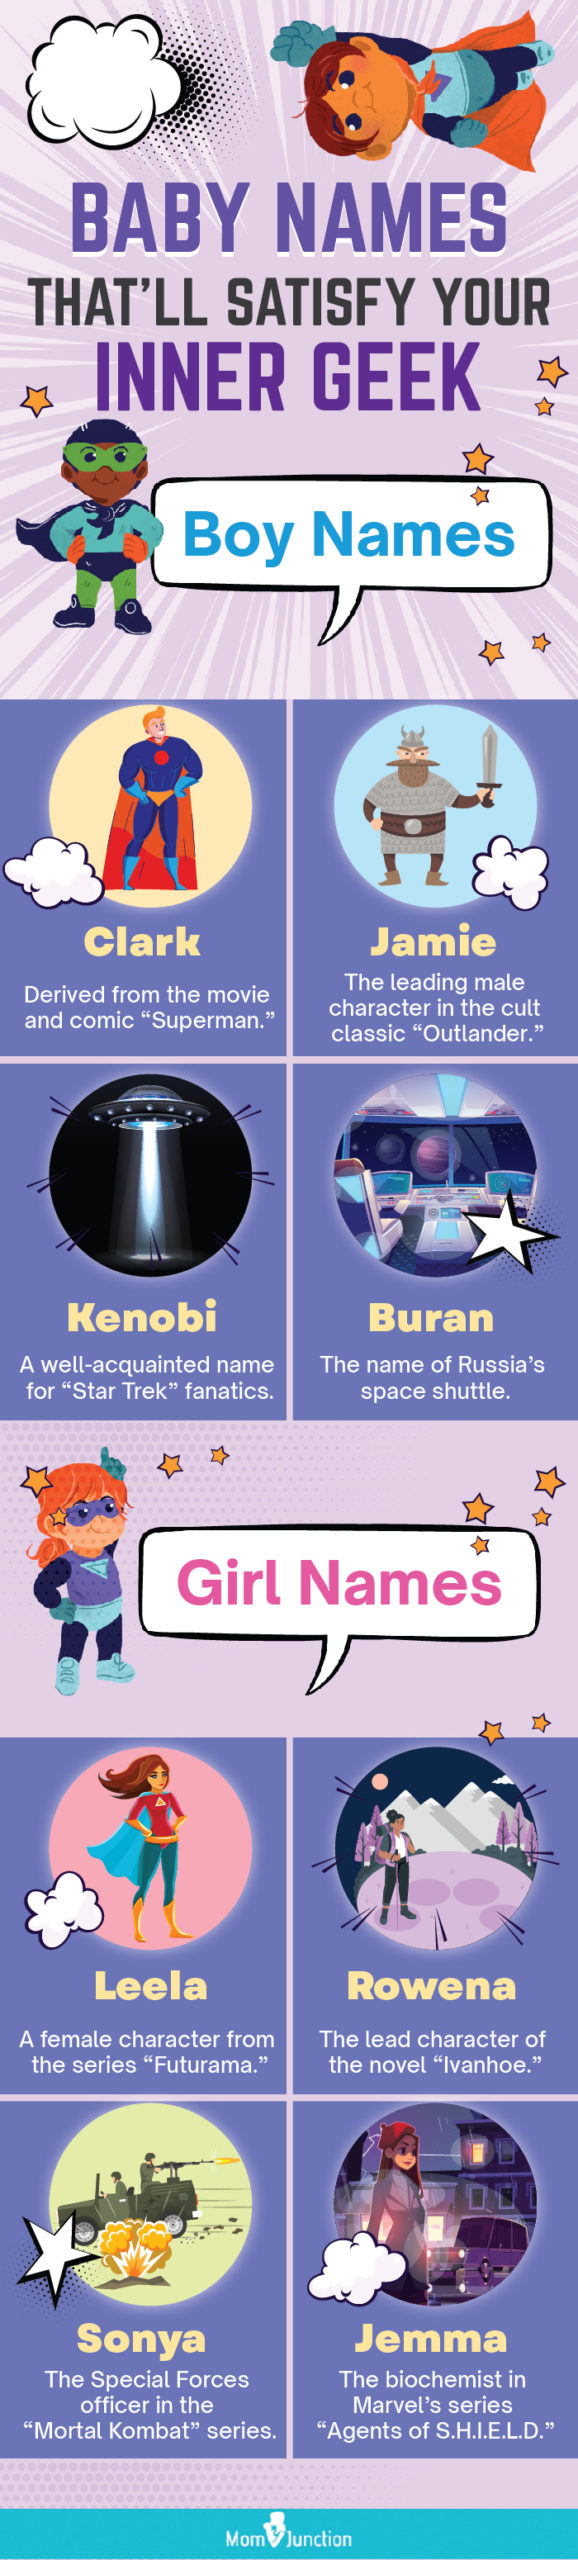 baby names that will satisfy inner geek (infographic)